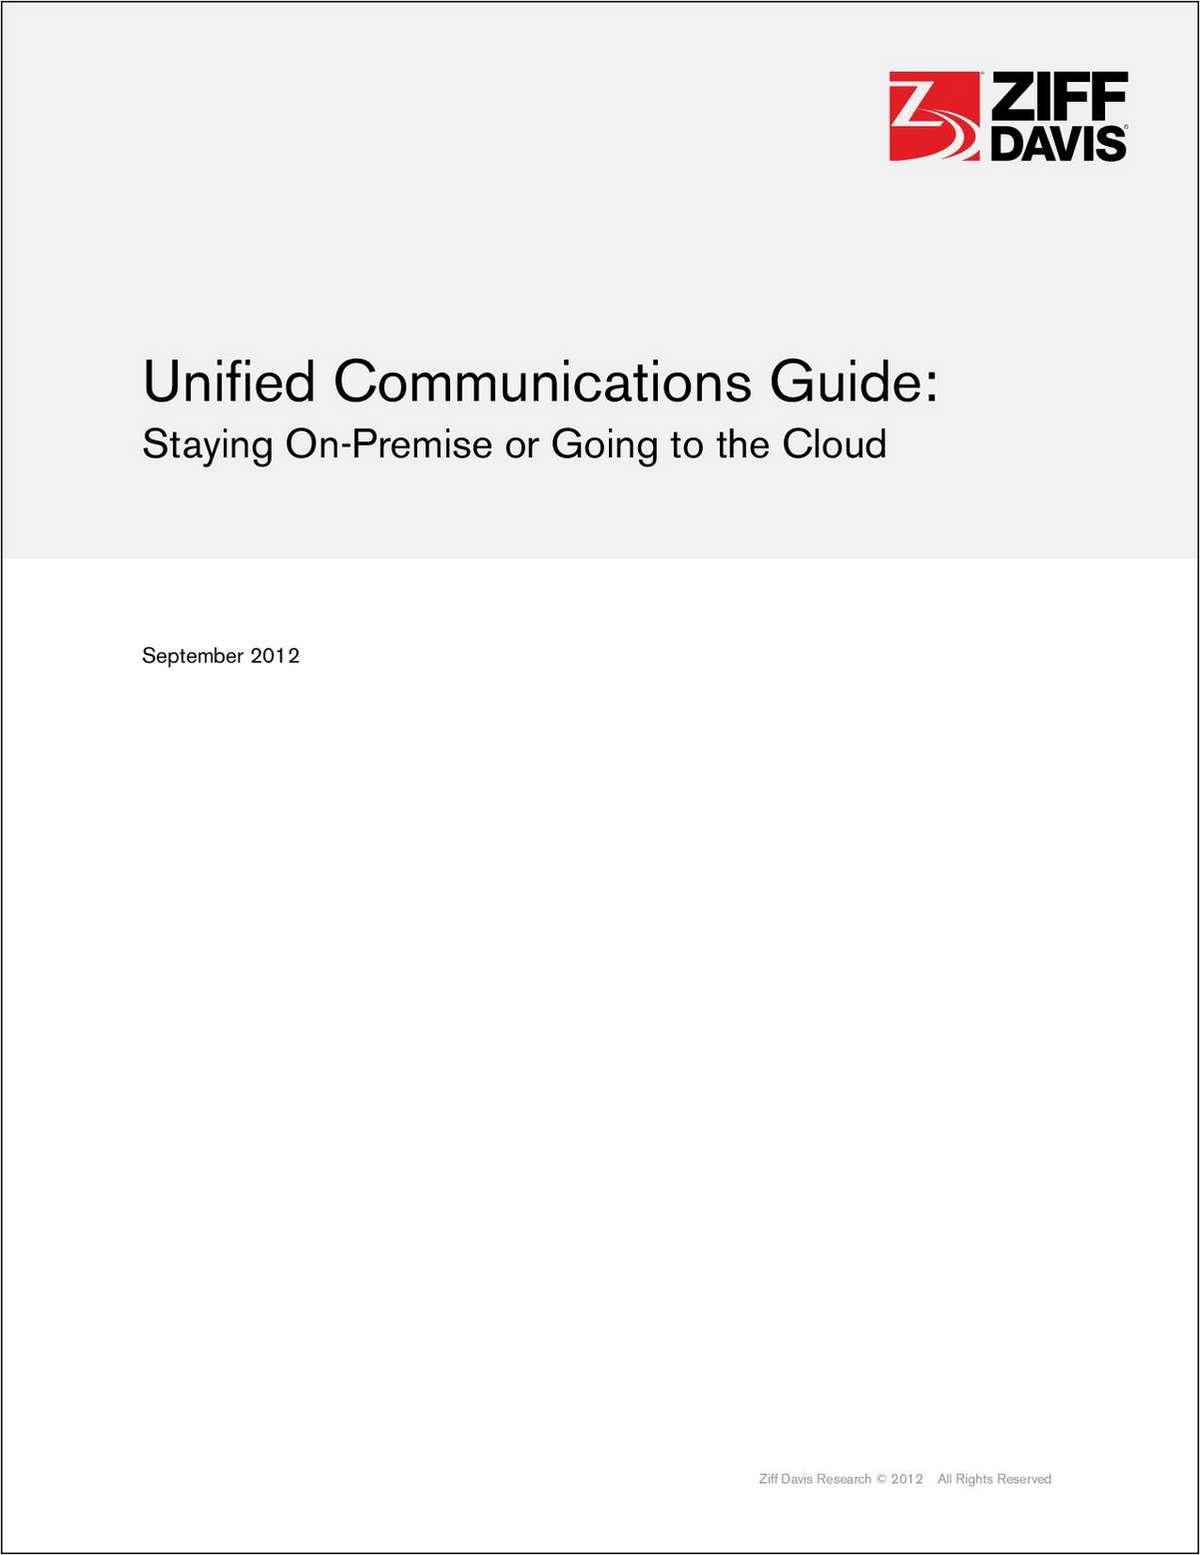 Unified Communications Guide: Staying On-Premise or Going to the Cloud